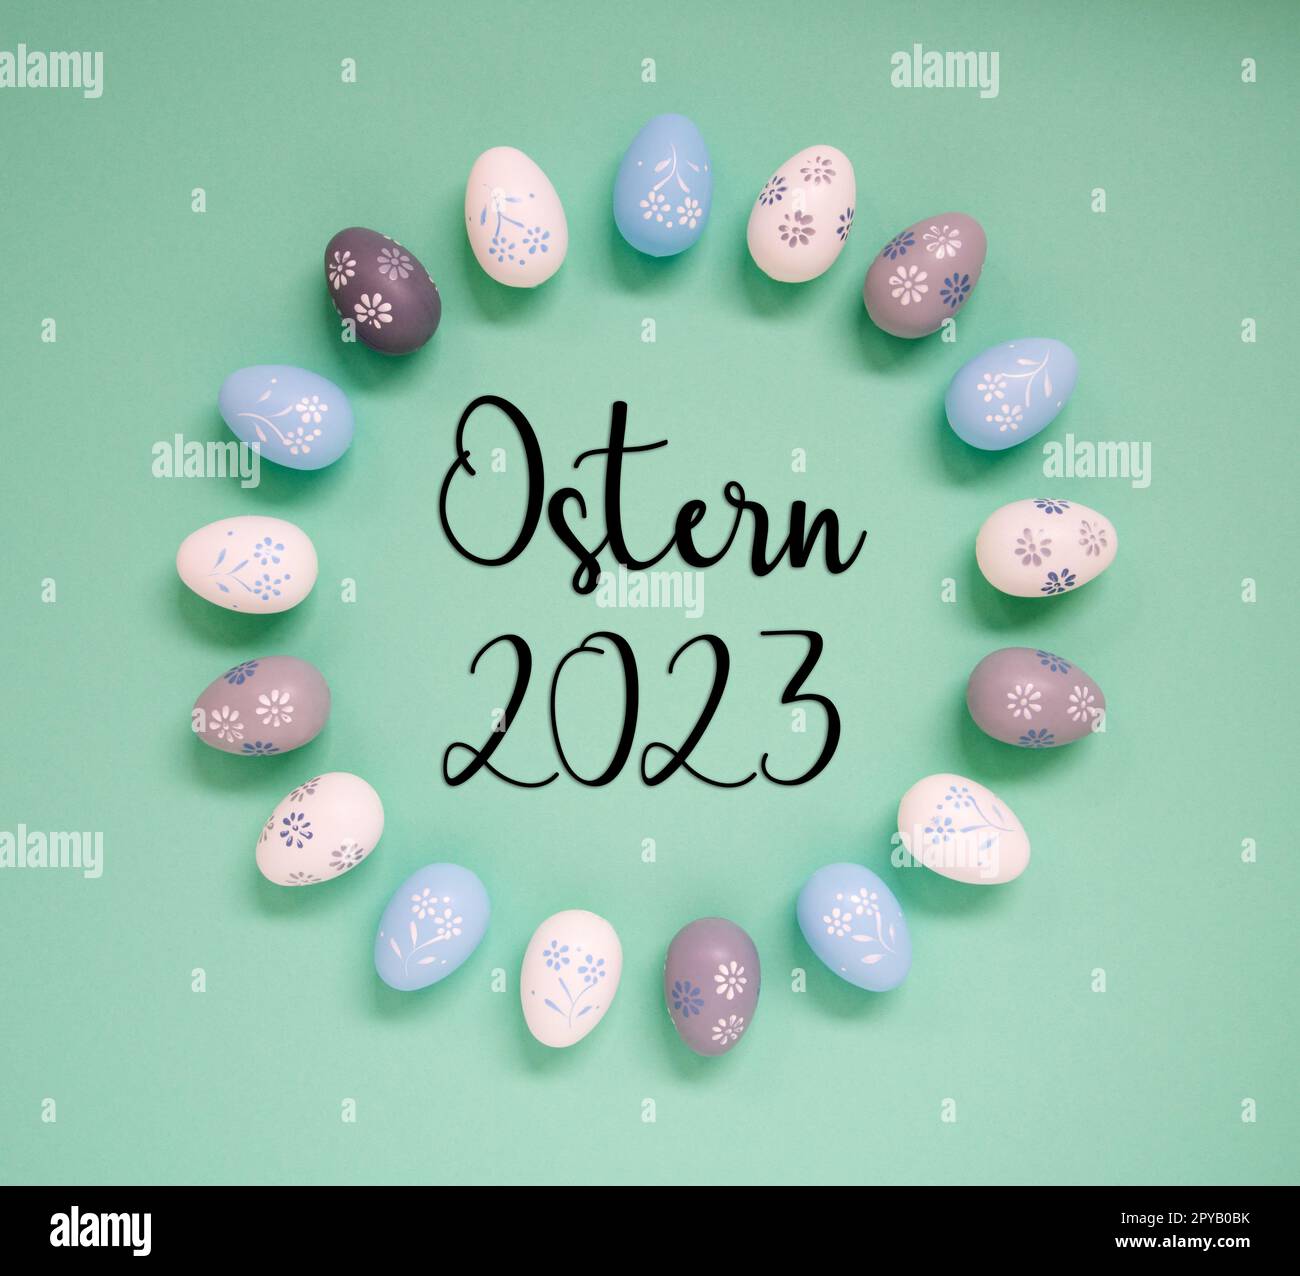 Easter Egg Decoration, Flat Lay, Ostern 2023 Means Easter 2023 Stock Photo